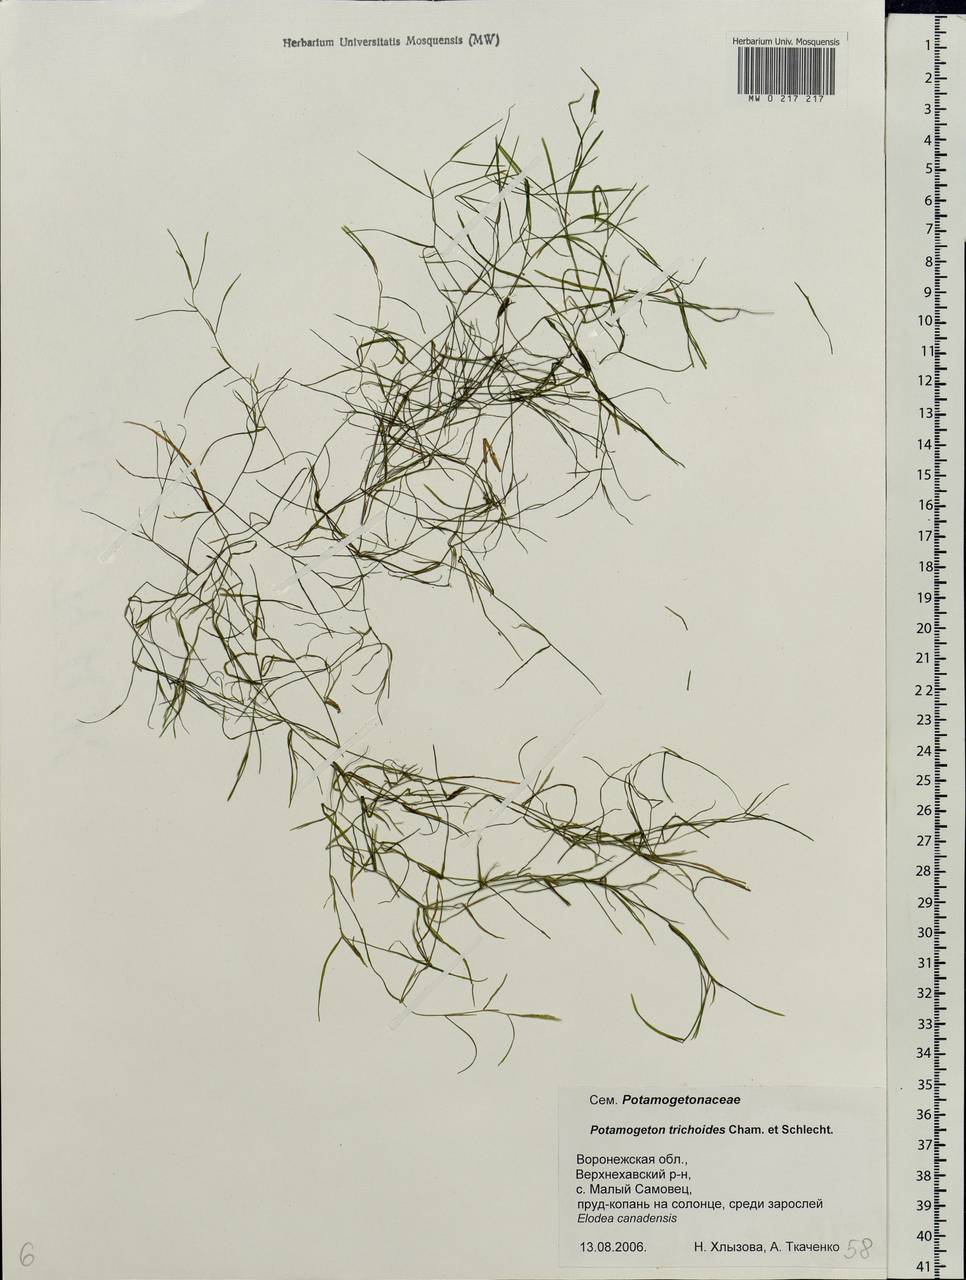 Potamogeton trichoides Cham. & Schltdl., Eastern Europe, Central forest-and-steppe region (E6) (Russia)